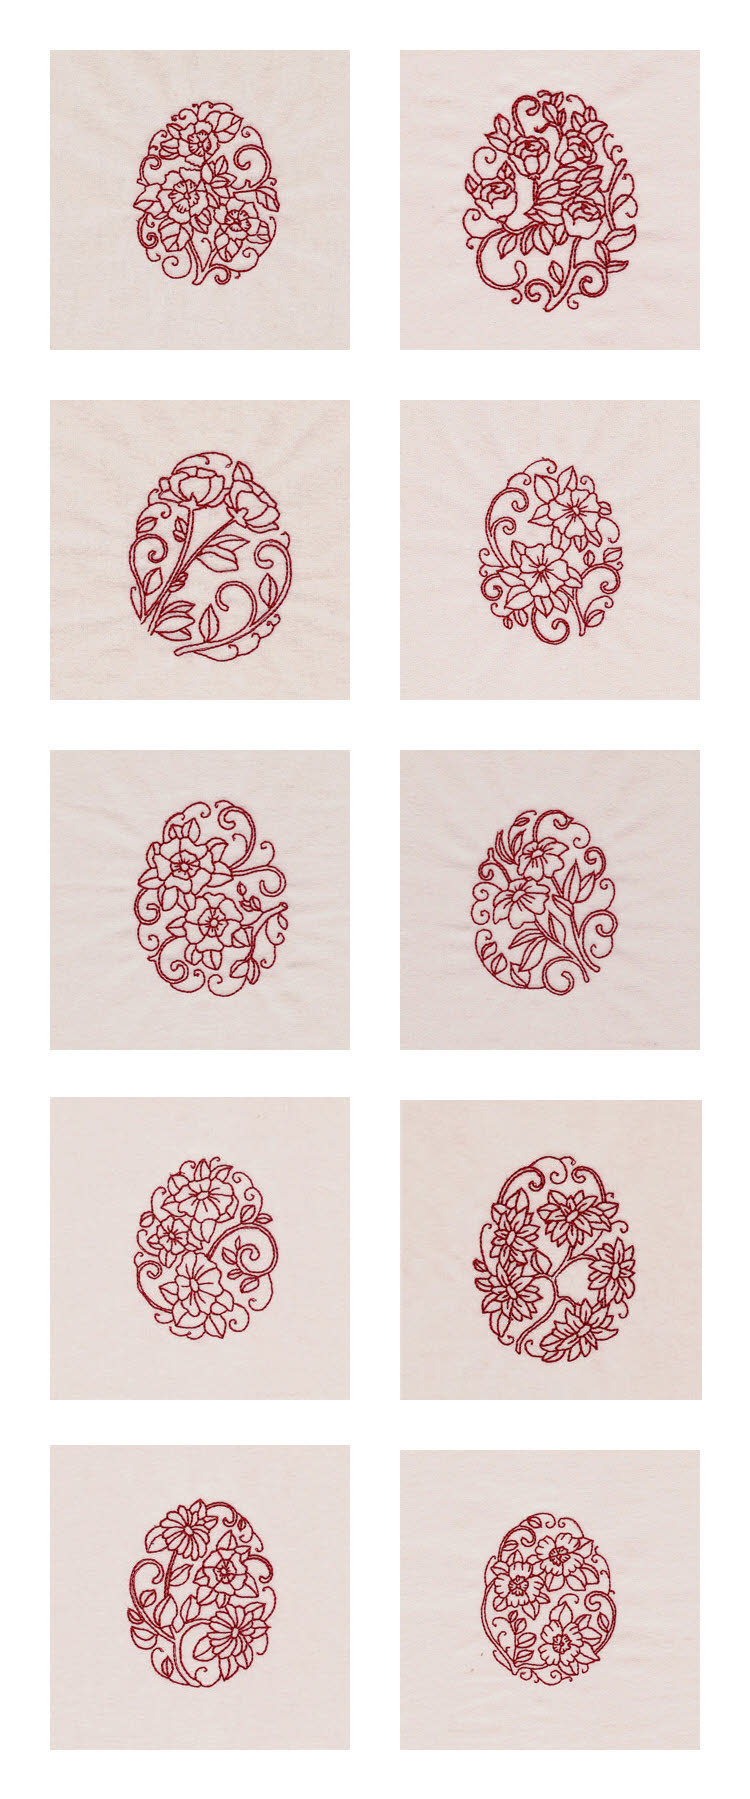 RW Floral Spring Eggs Embroidery Machine Design Details